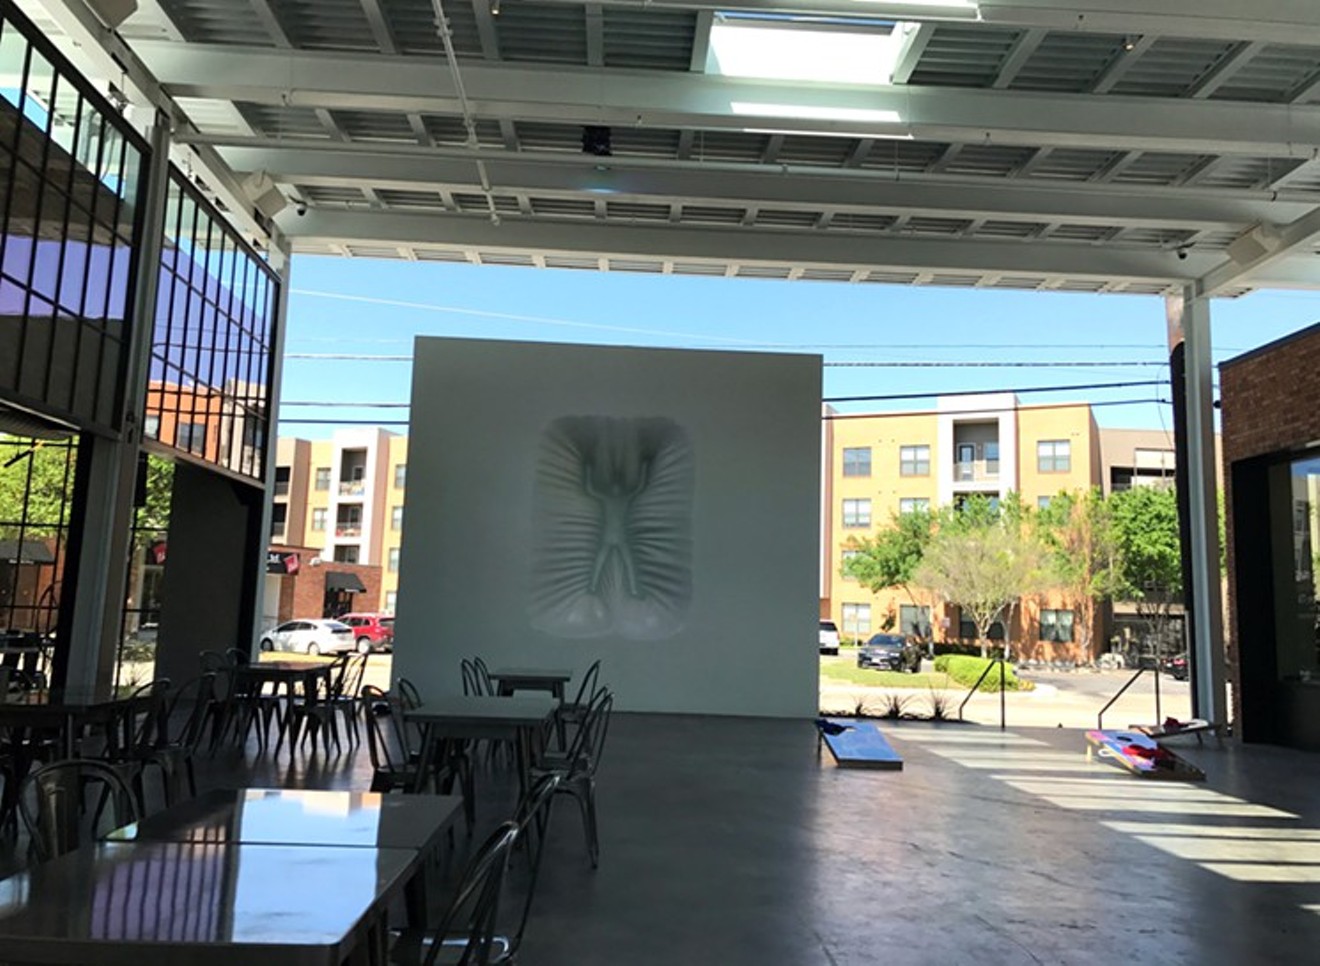 If you've ever wanted to play cornhole at the foot of an 18-foot-tall art installation, the courtyard between Wheelhouse and Sassetta is your kind of hang spot.